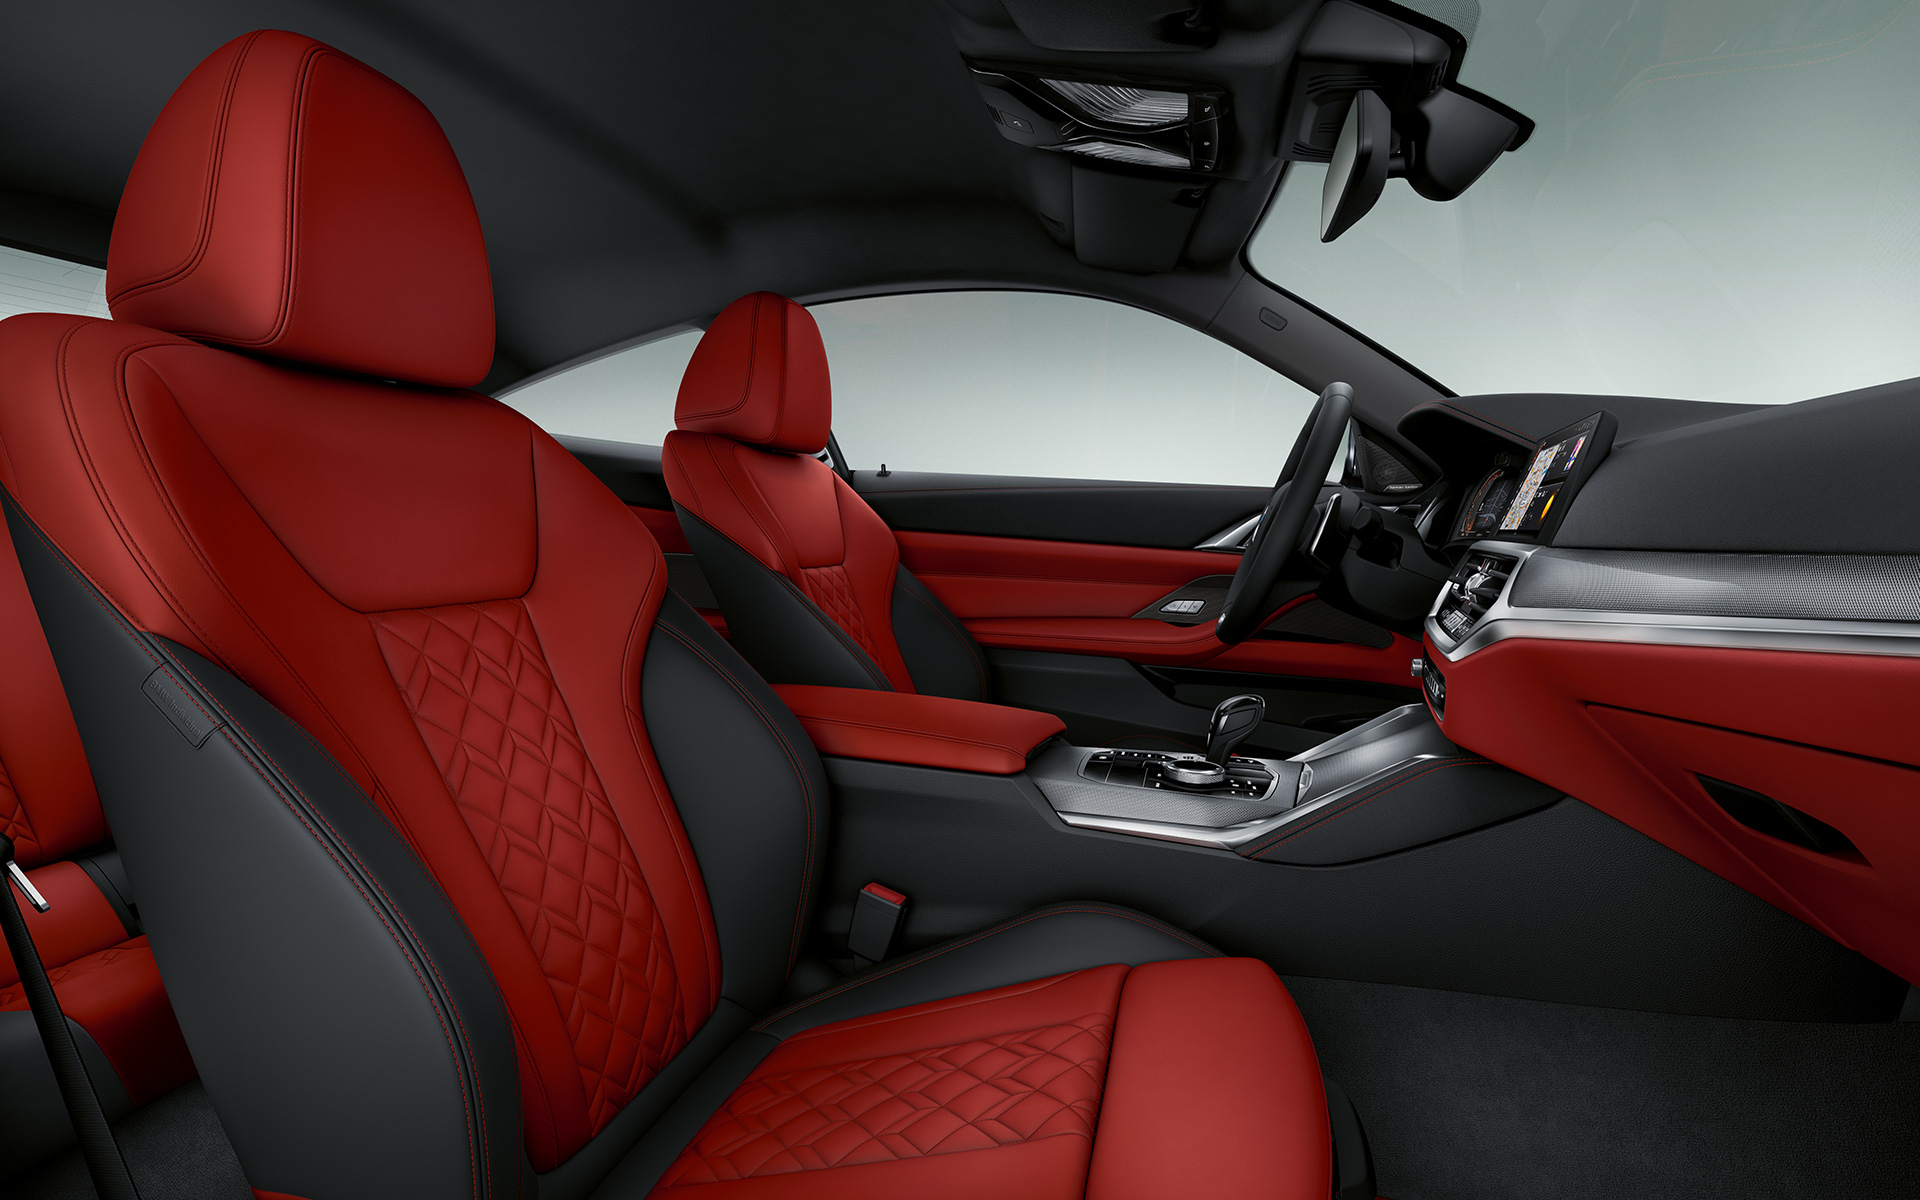 BMW Individual extended leather trim 'Merino' Fiona Red/Black BMW 4 Series Coupé Individual G22 2020 